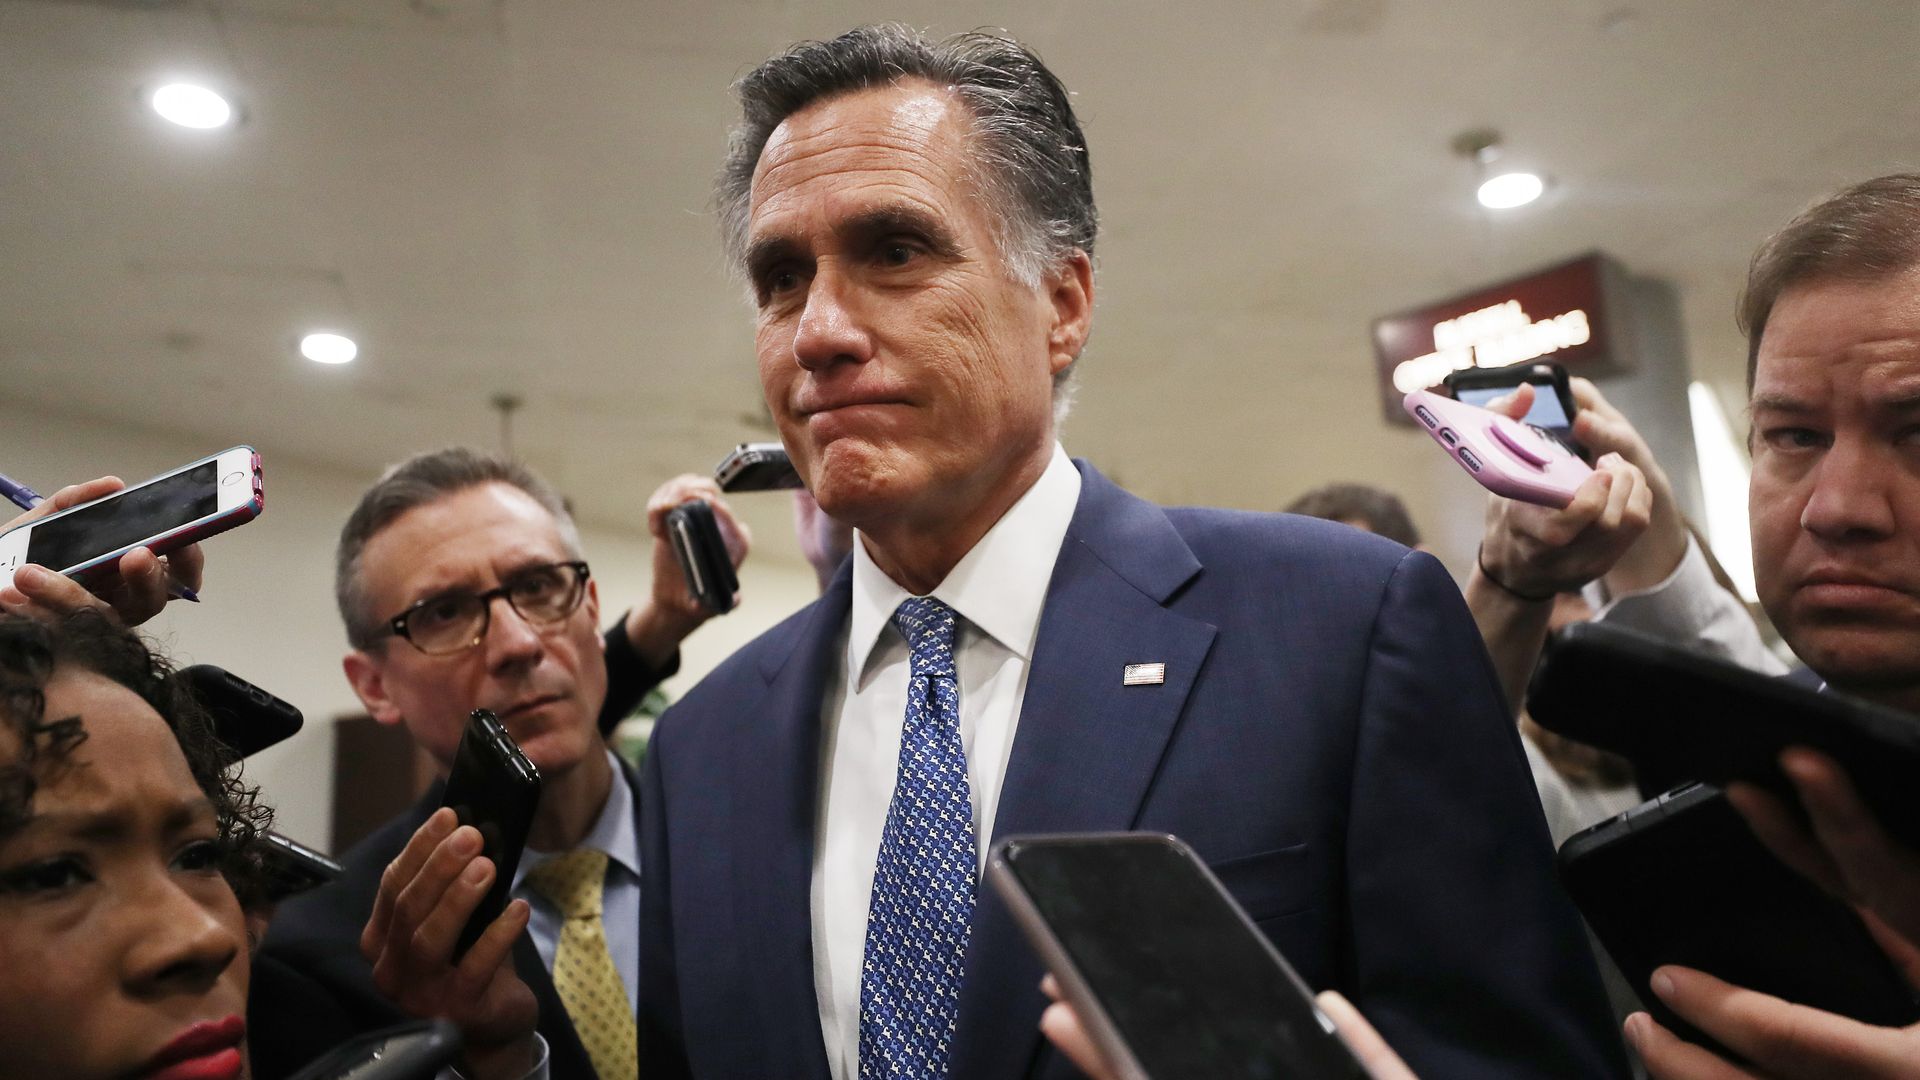 Mitt Romney shunned from conservative conference after impeachment vote - Axios1920 x 1080